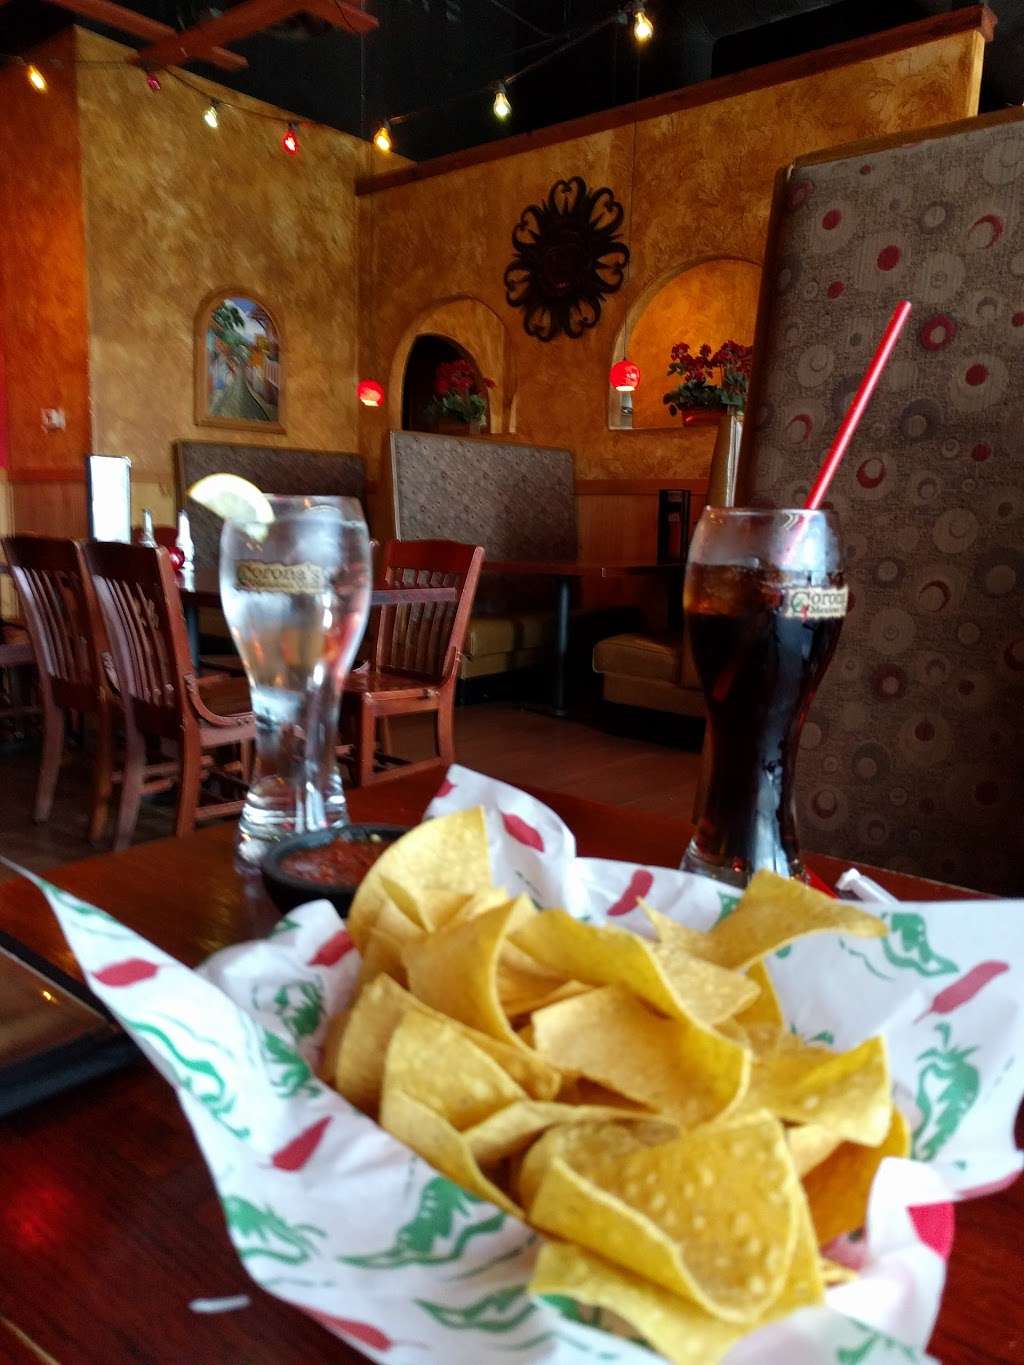 Coronas Mexican Grill | 2255 W 136th Ave, Broomfield, CO 80023 | Phone: (303) 466-6600